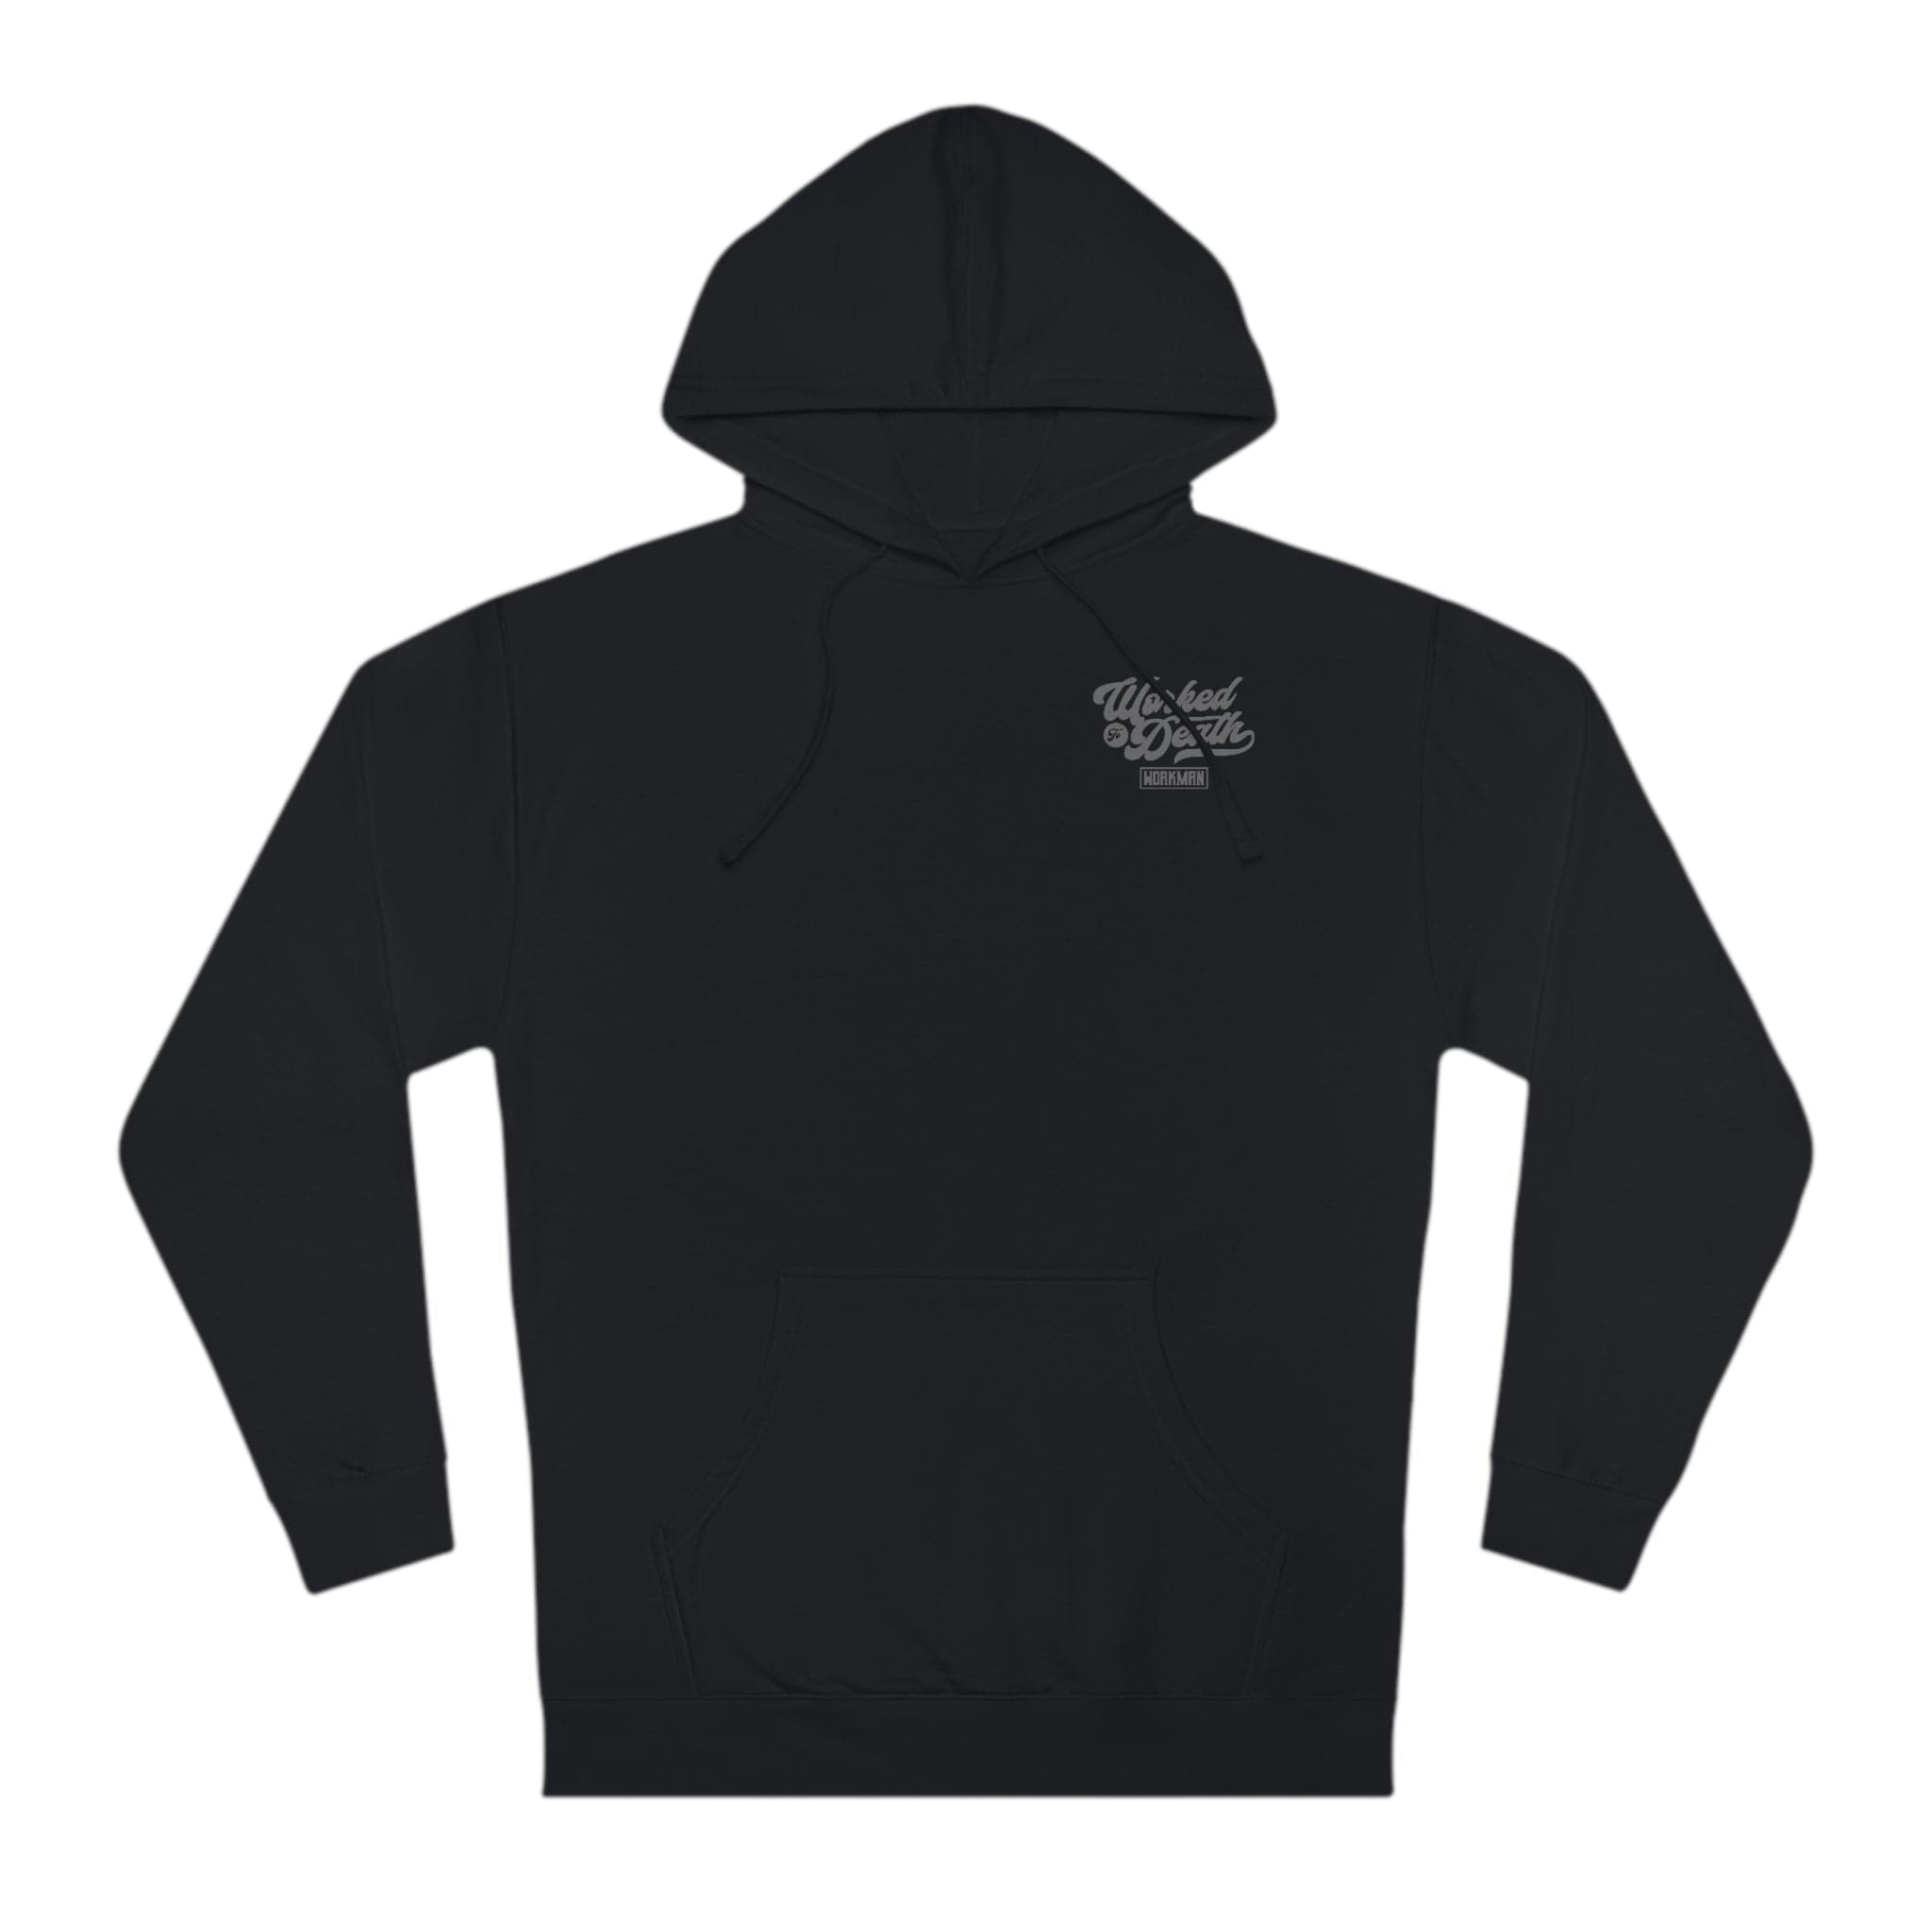 Safety Third - Hoodie - Workman Trading Co.